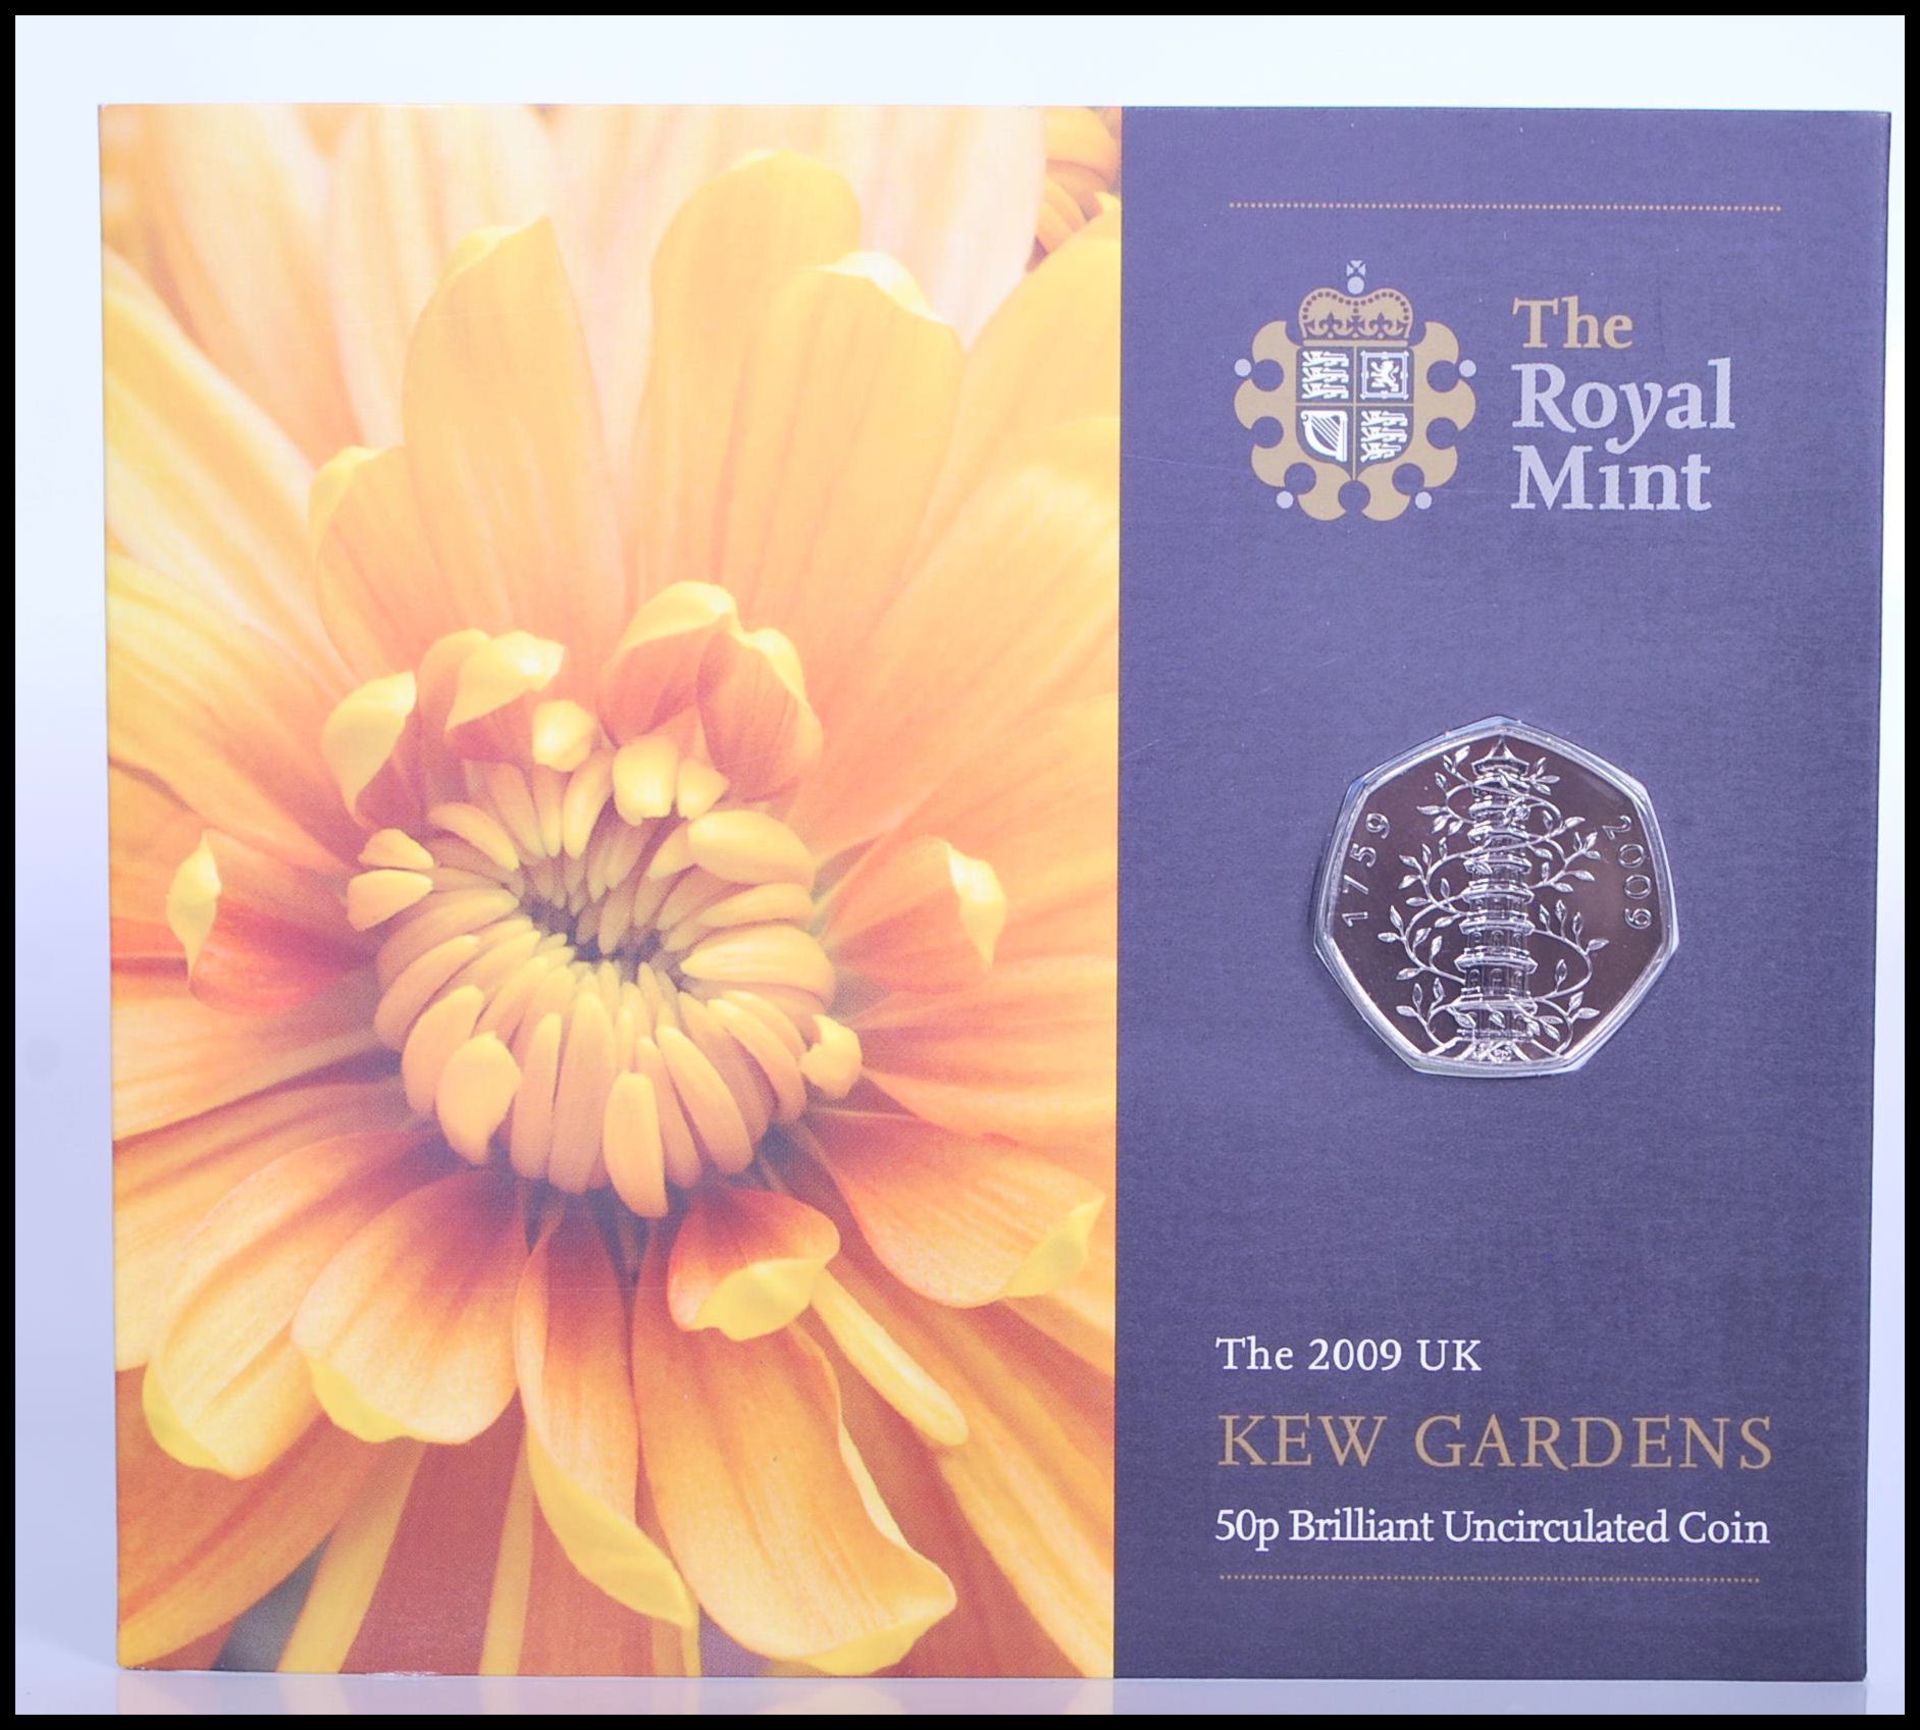 THE ROYAL MINT UNCIRCULATED 2009 KEW GARDENS 50p COIN, mounted to a presentation card